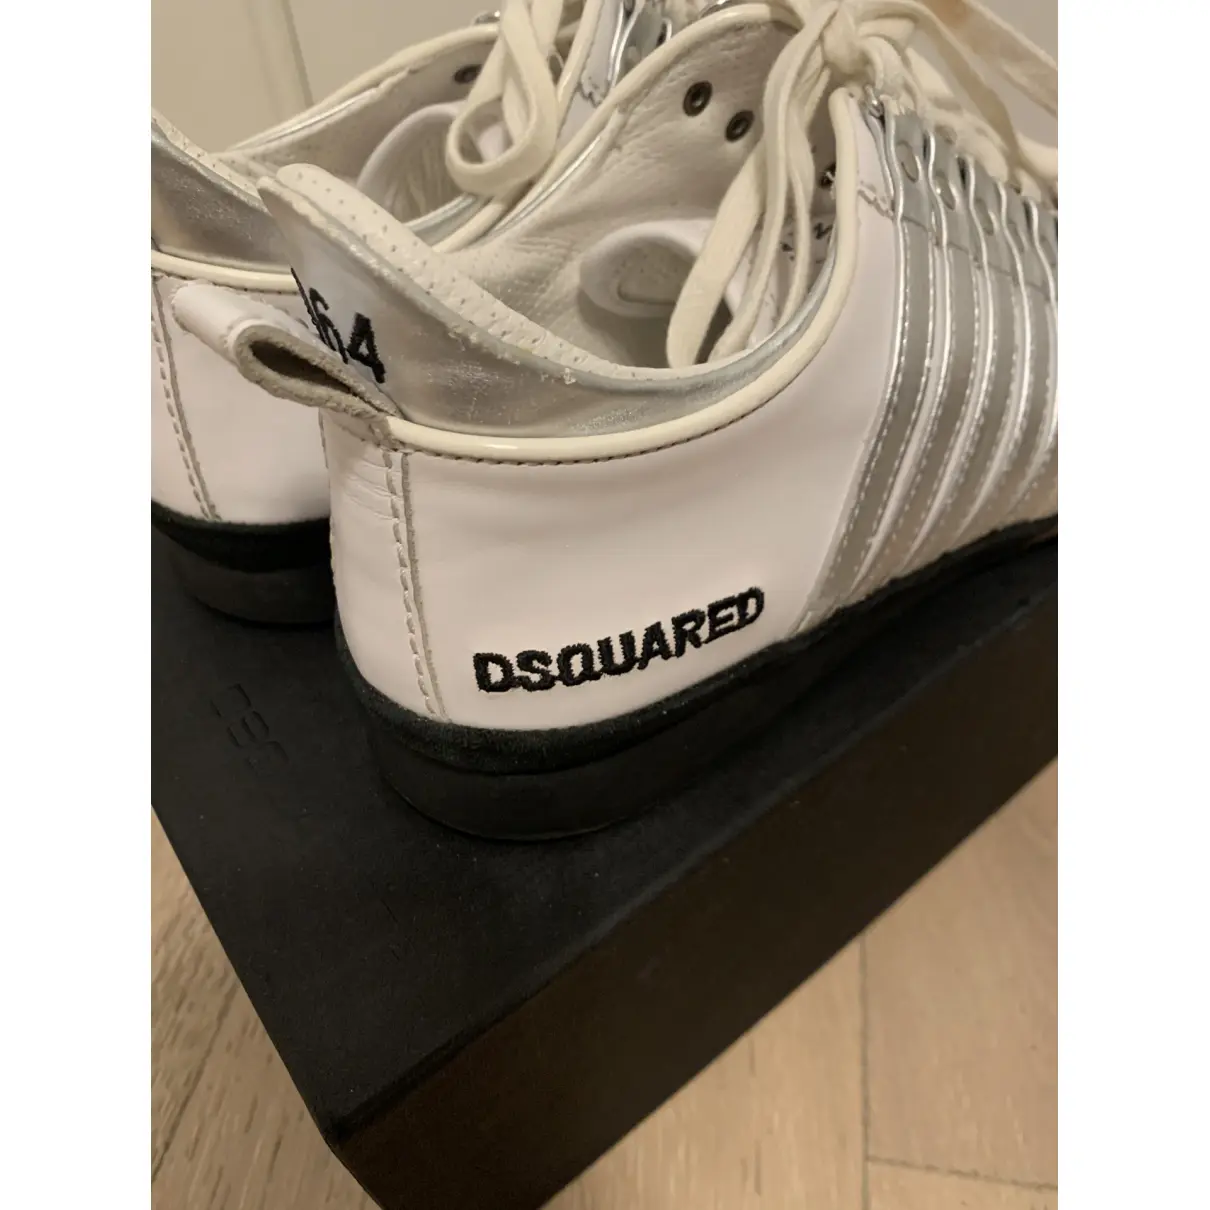 Buy Dsquared2 251 leather low trainers online